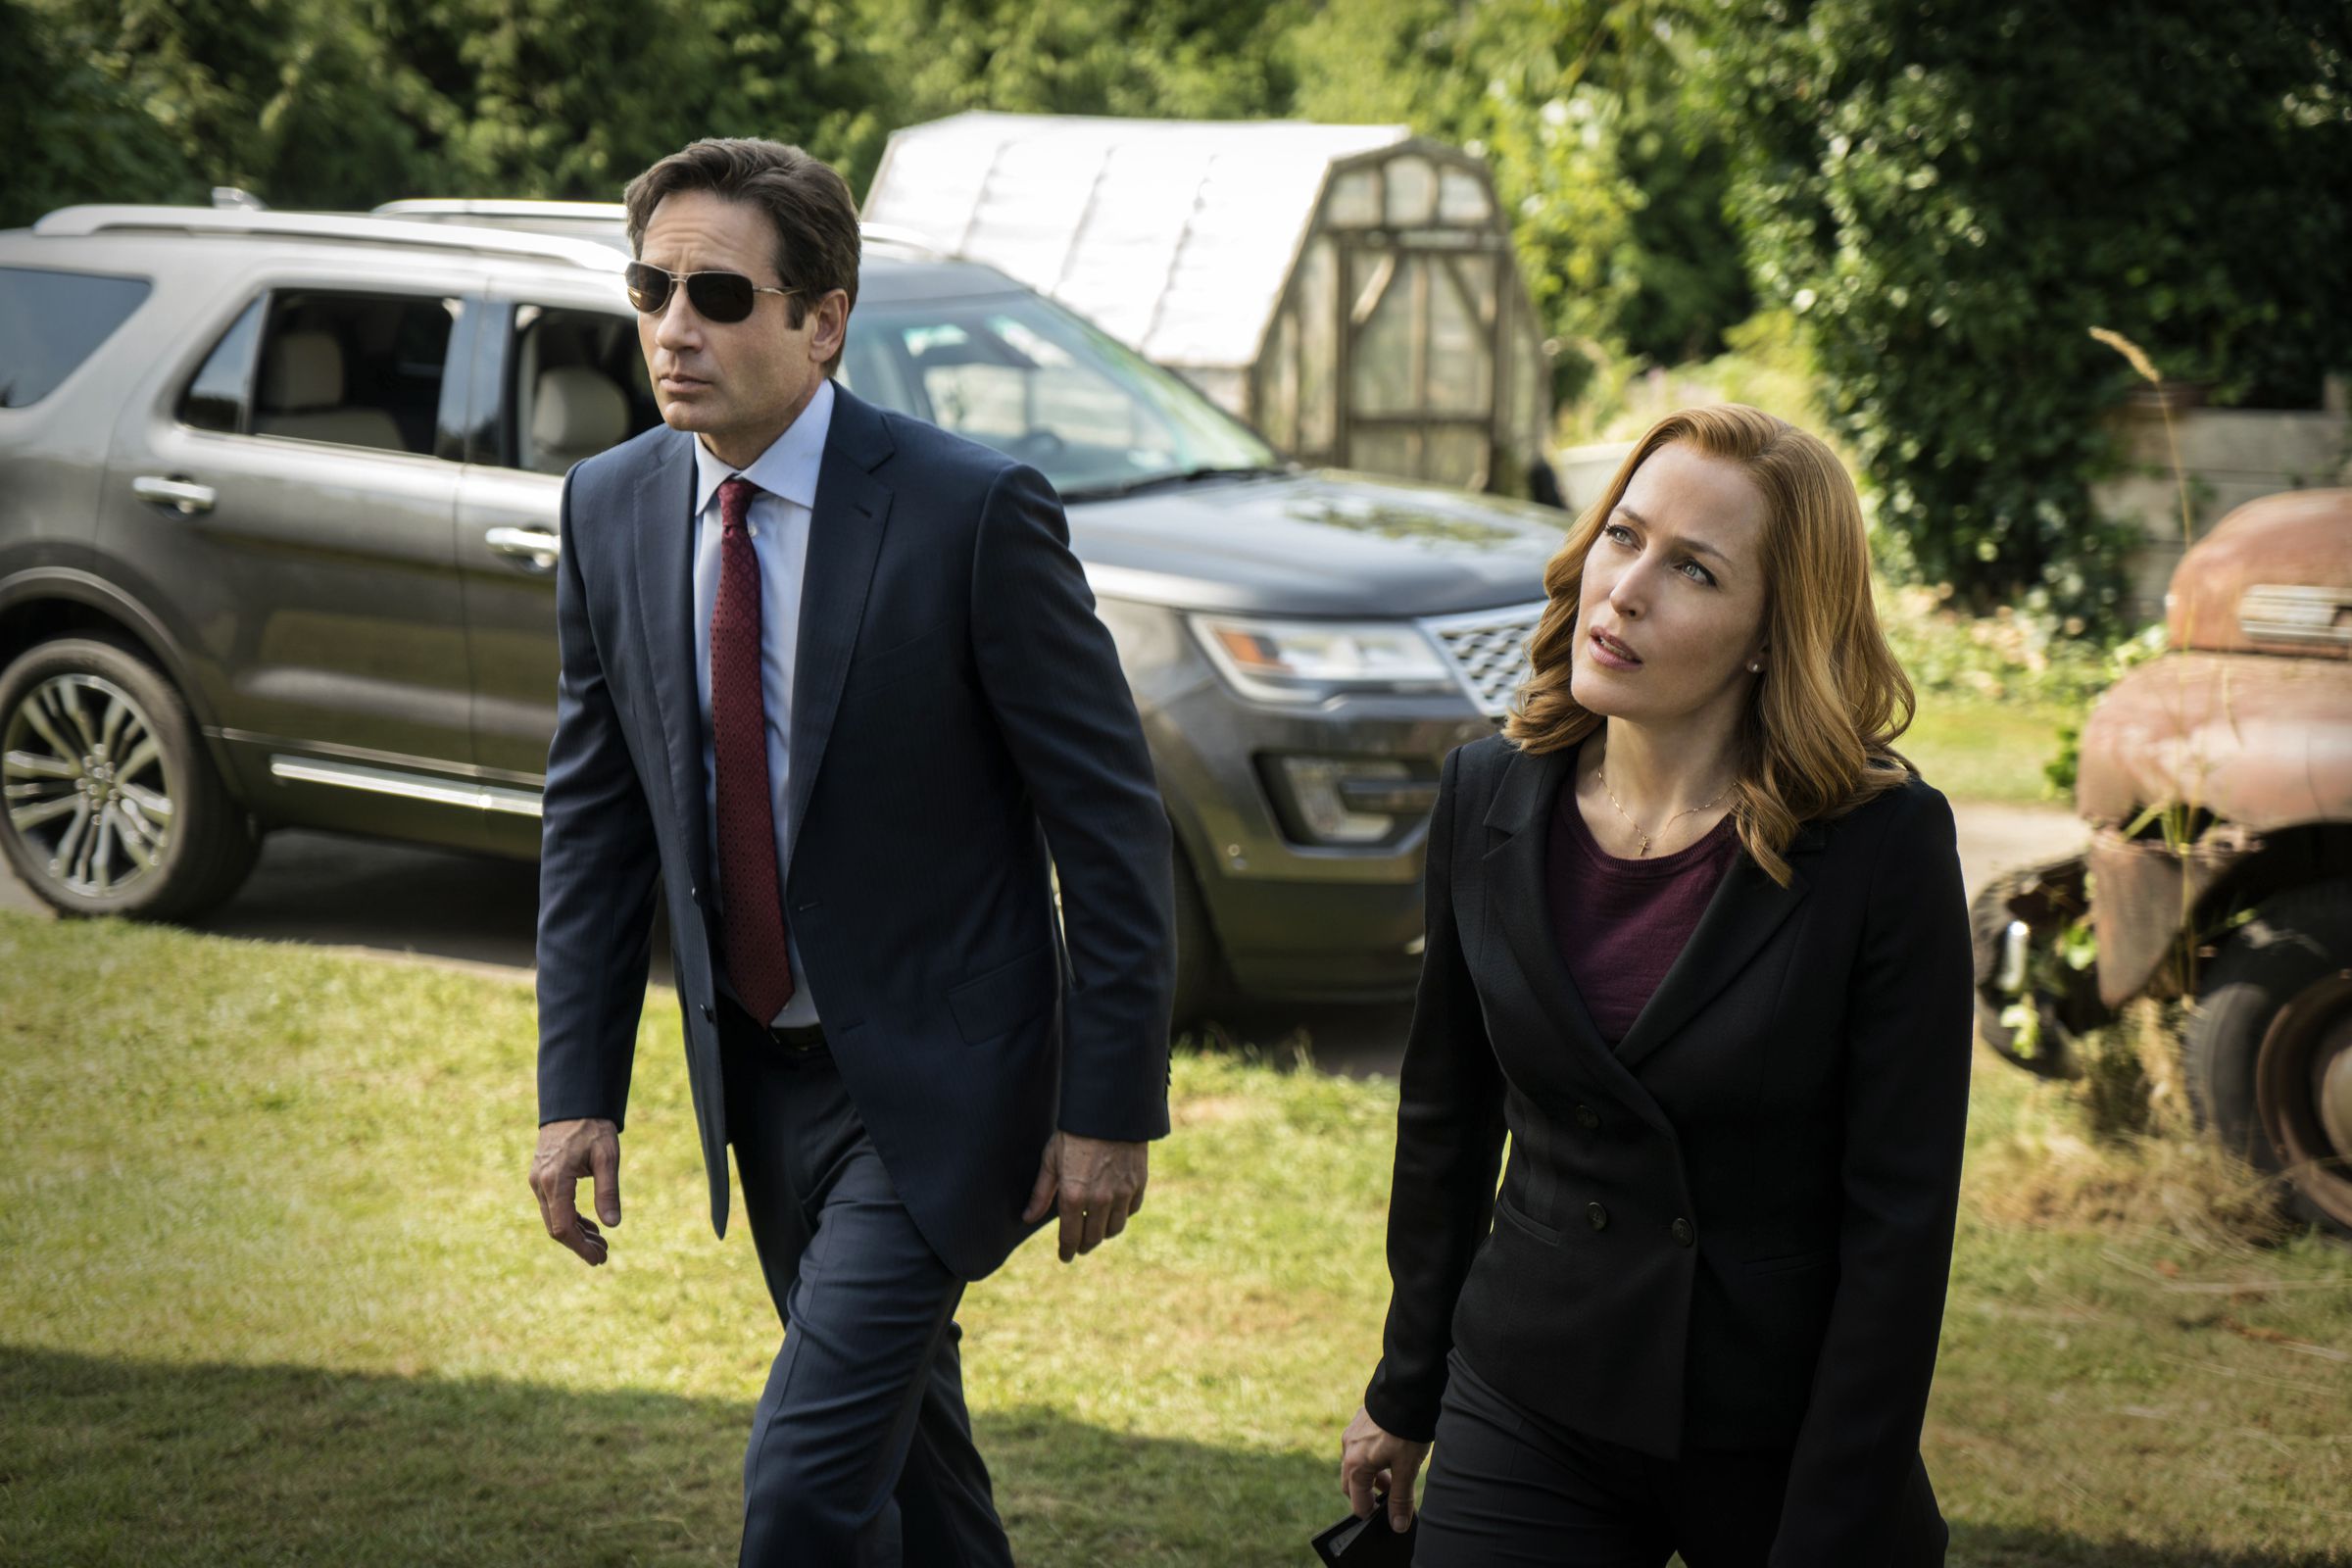 An image of David Duchovny and Gillian Anderson as their characters, Mulder and Scully. Both are wearing little business suits.